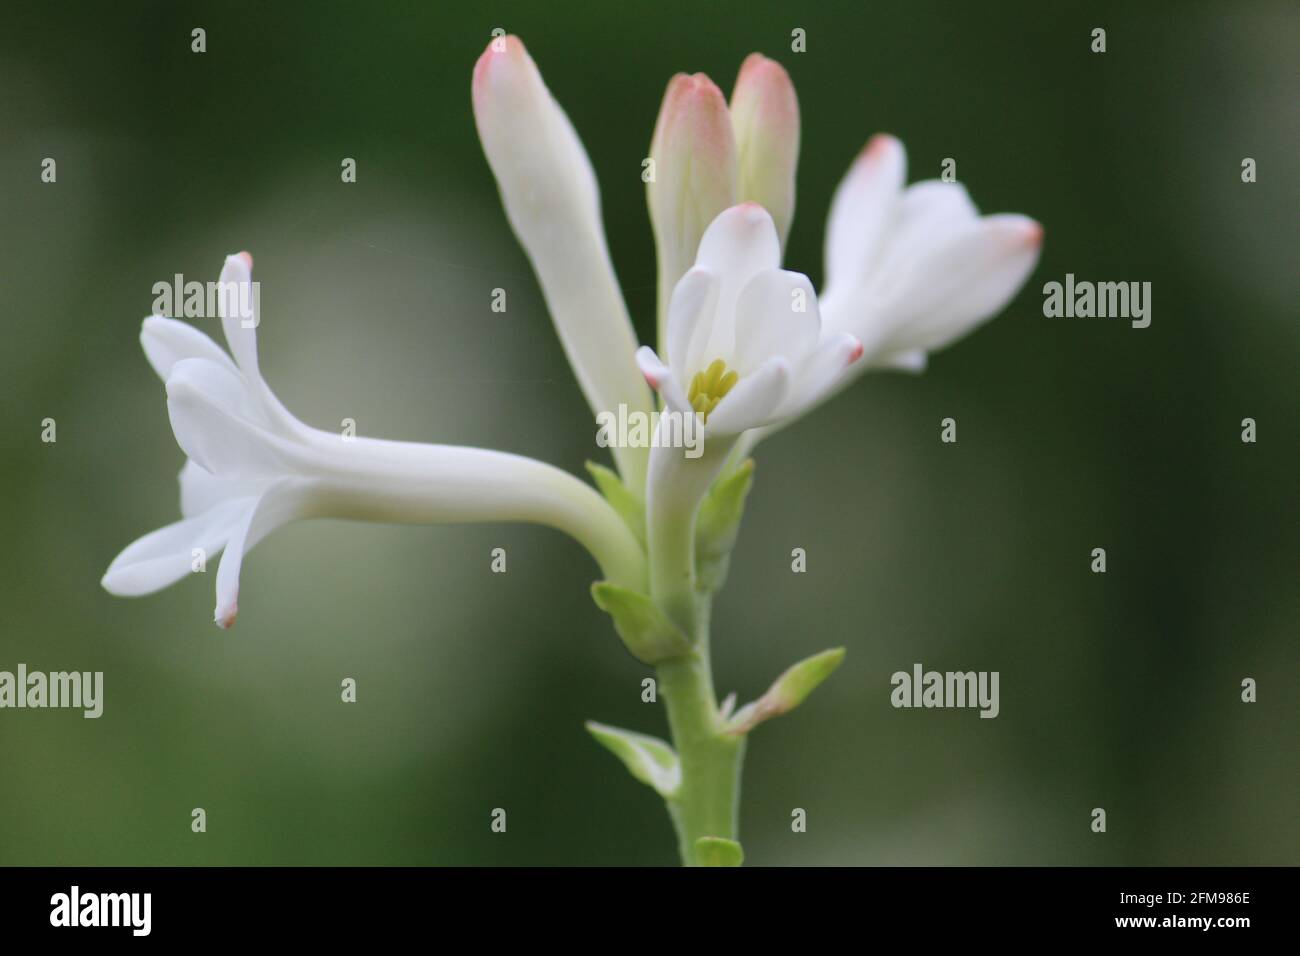 Selective focus shot of a white flower of tuberose plant in a garden Stock Photo